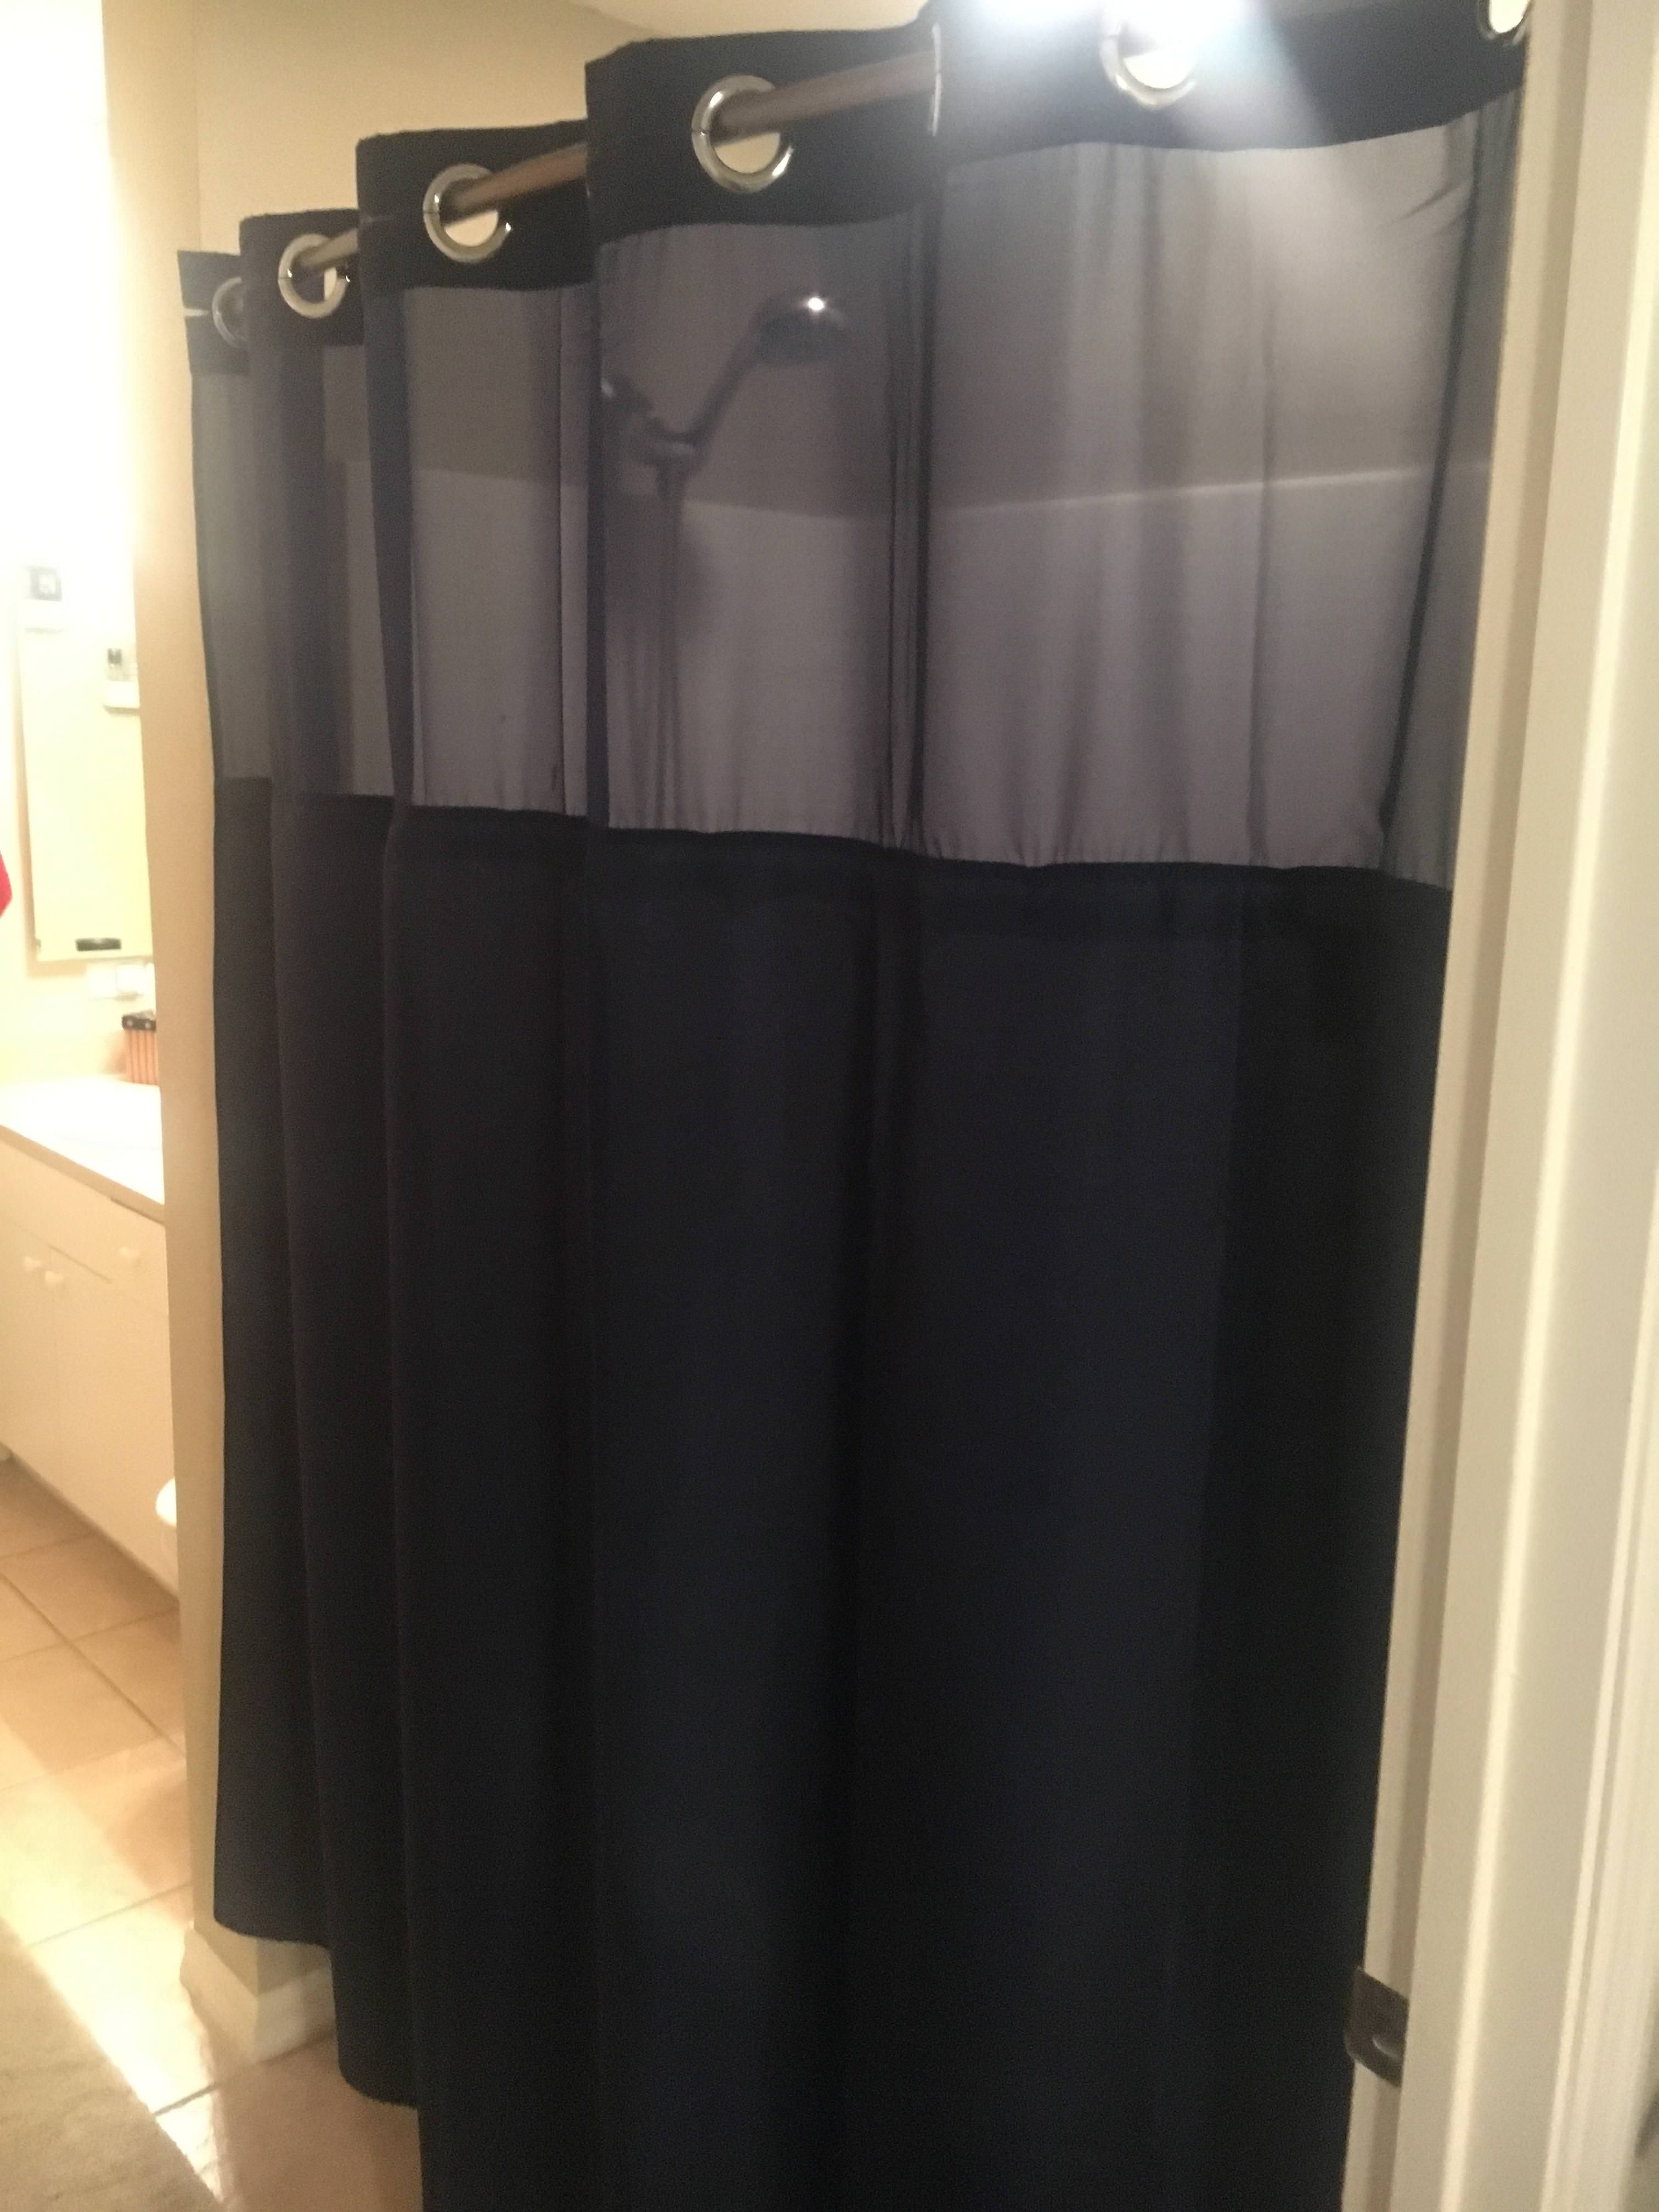 I’m married and have no say in things like shower curtains